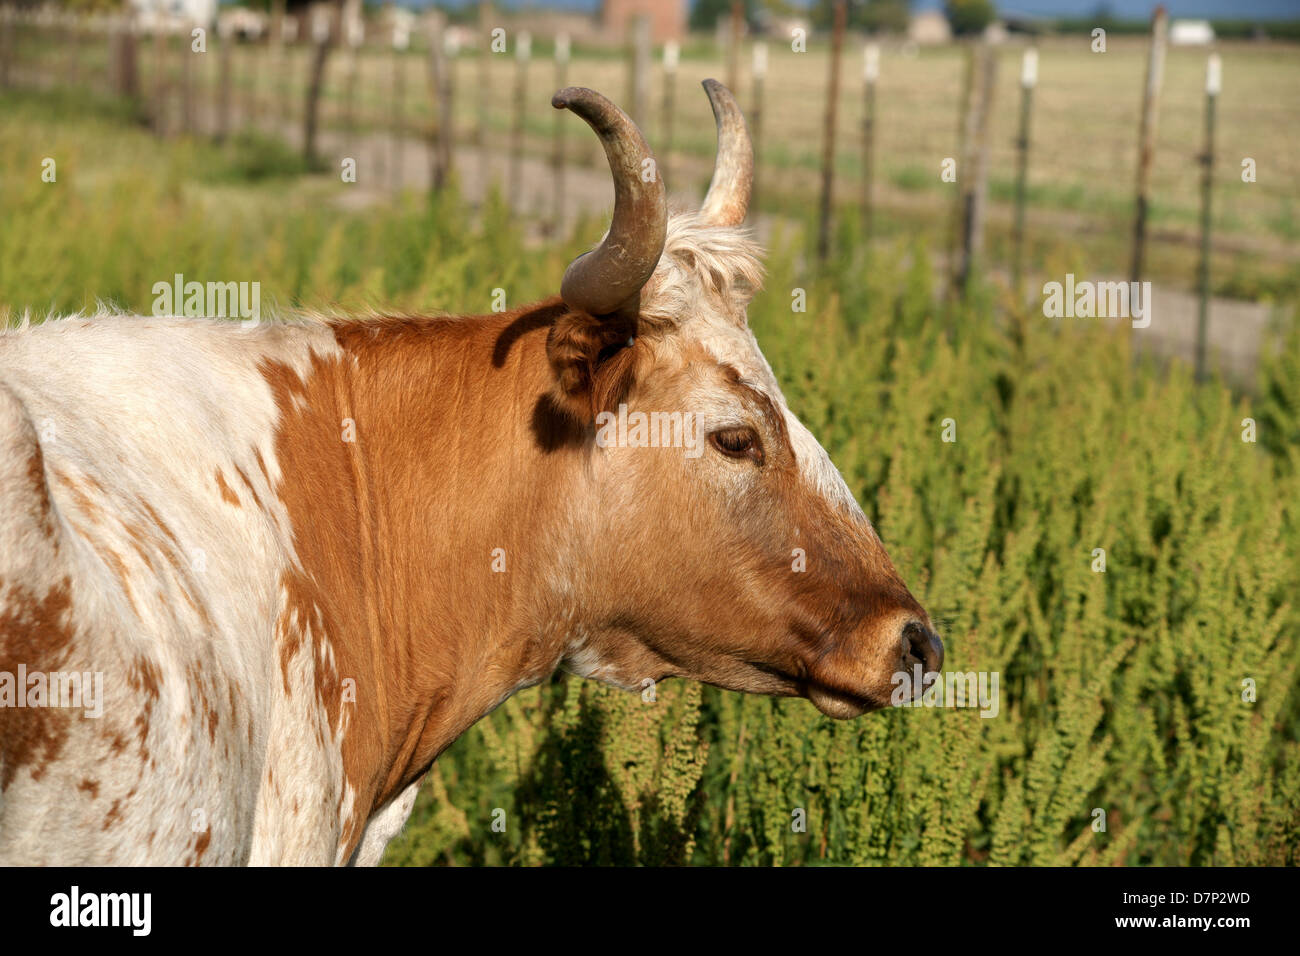 Head shot of Texas longhorn cow. Brown and white coat. Stock Photo